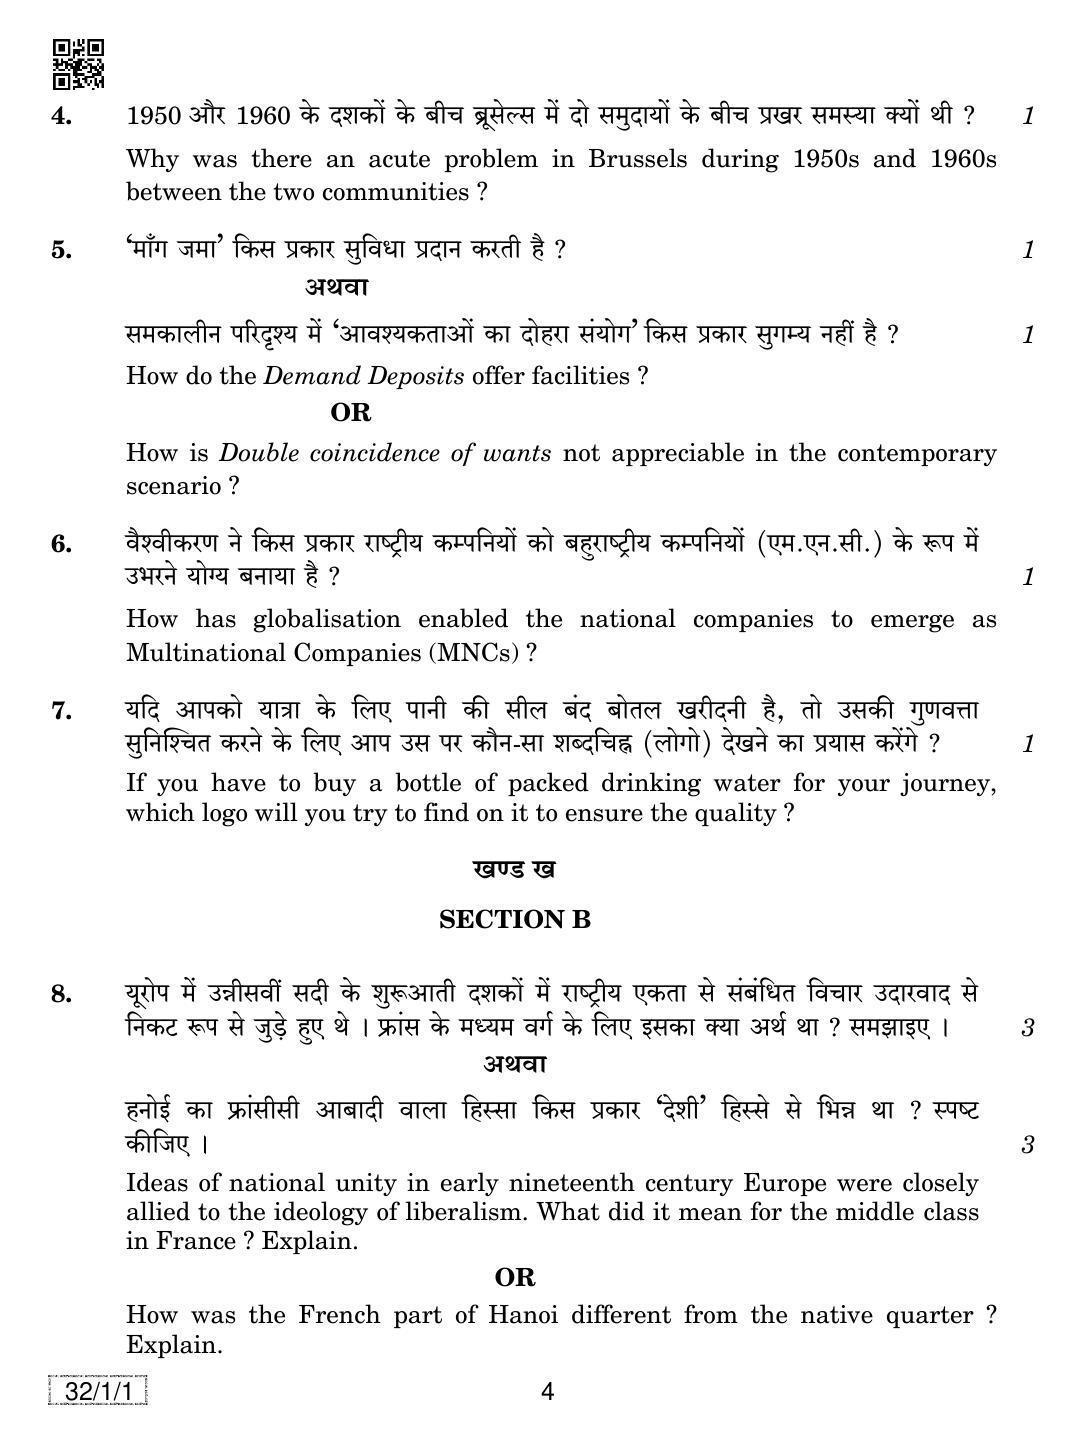 CBSE Class 10 32-1-1 SOCIAL SCIENCE 2019 Compartment Question Paper - Page 4